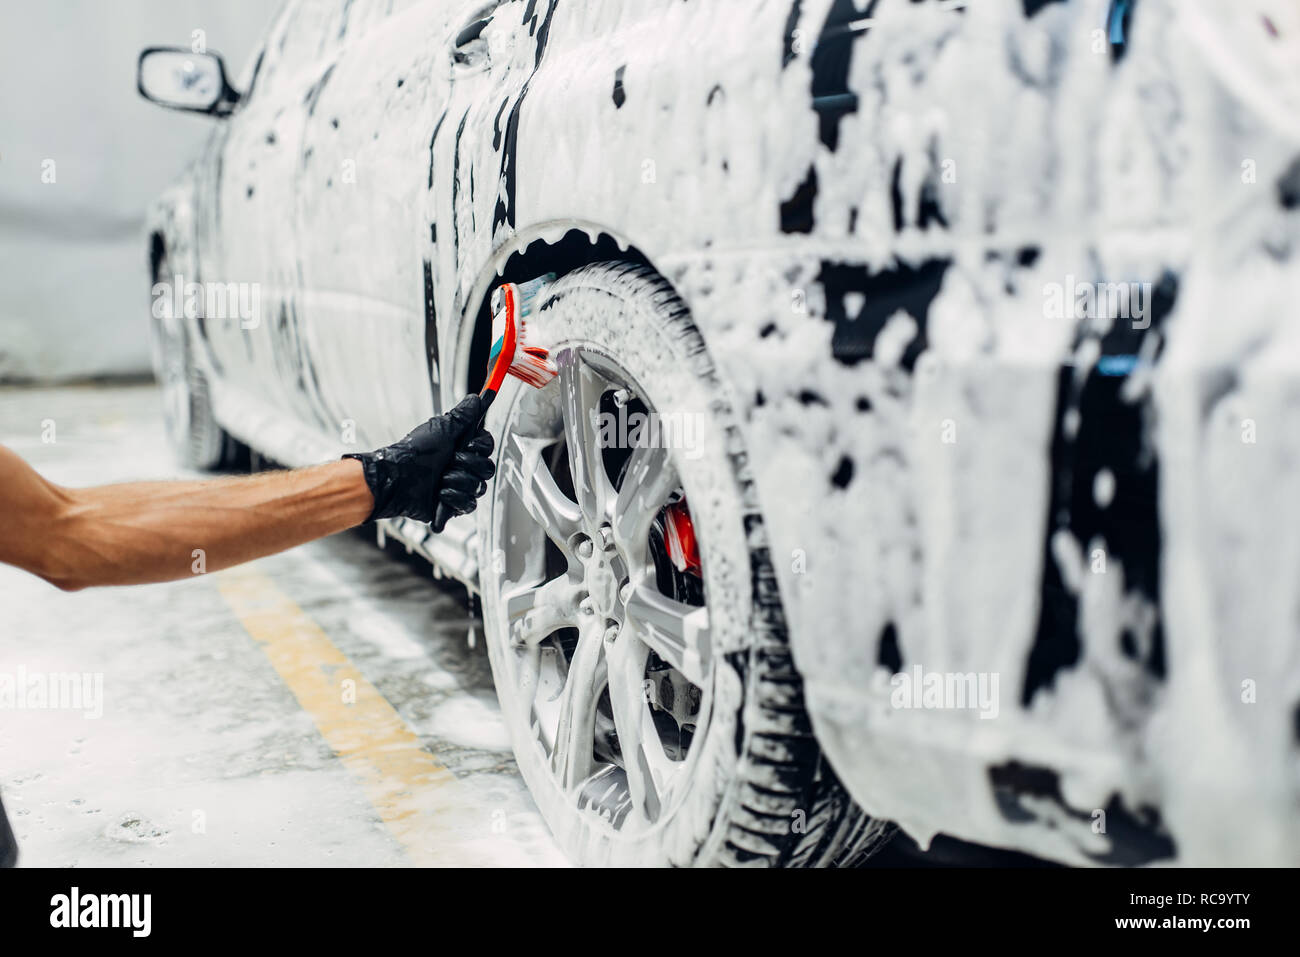 Carwash service, car in foam, side view. Auto detailing, washing of wheels  with brush Stock Photo - Alamy